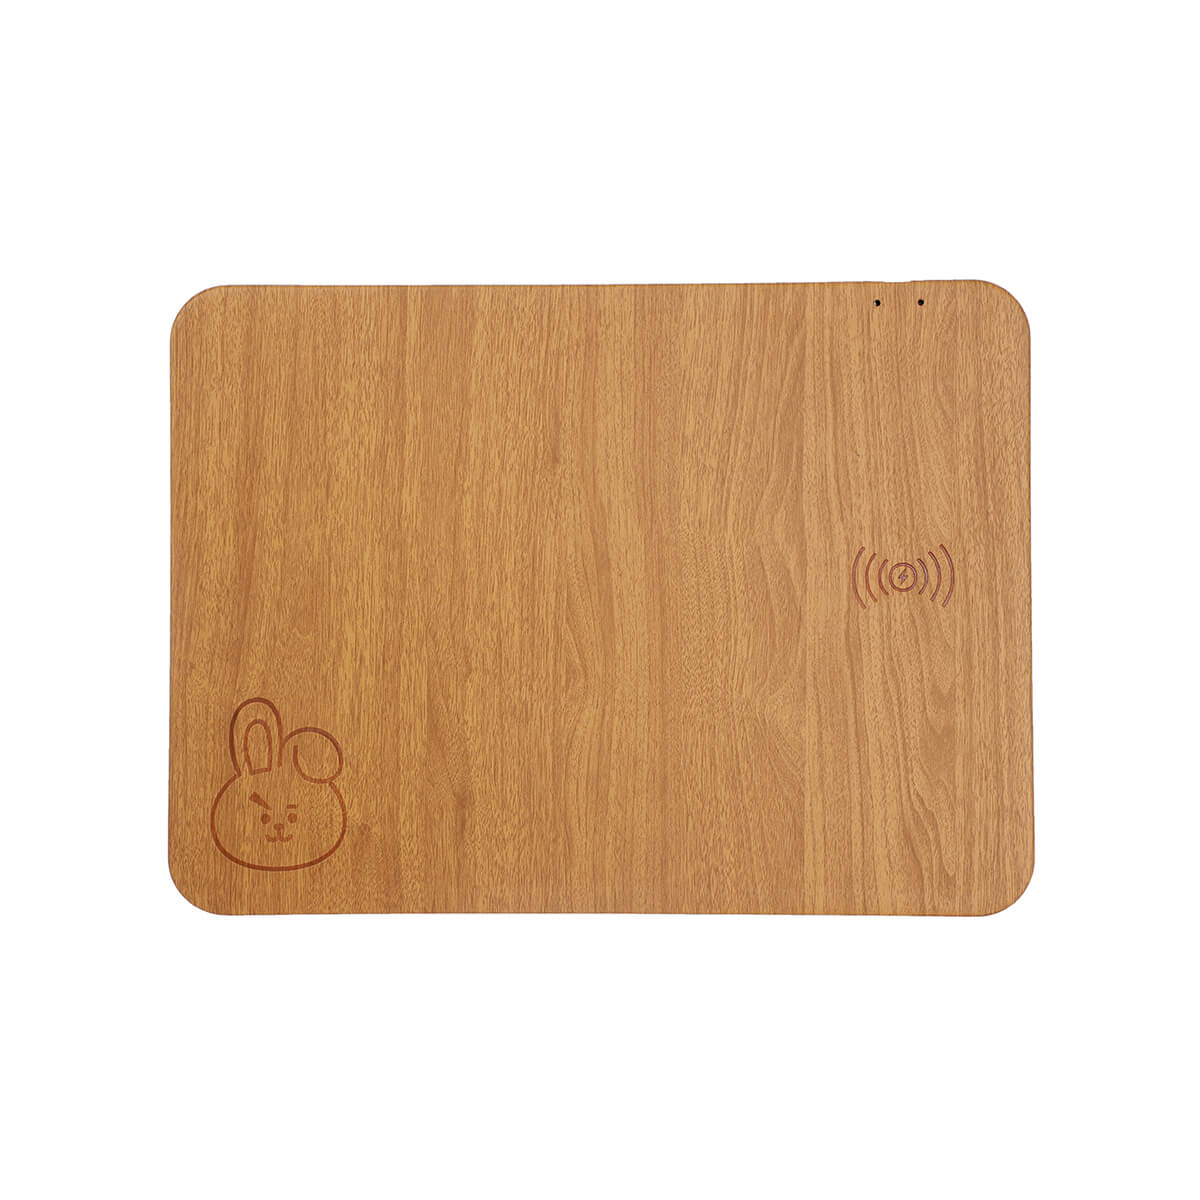 BT21 COOKY Wood-like Mousepad + Wireless Charger